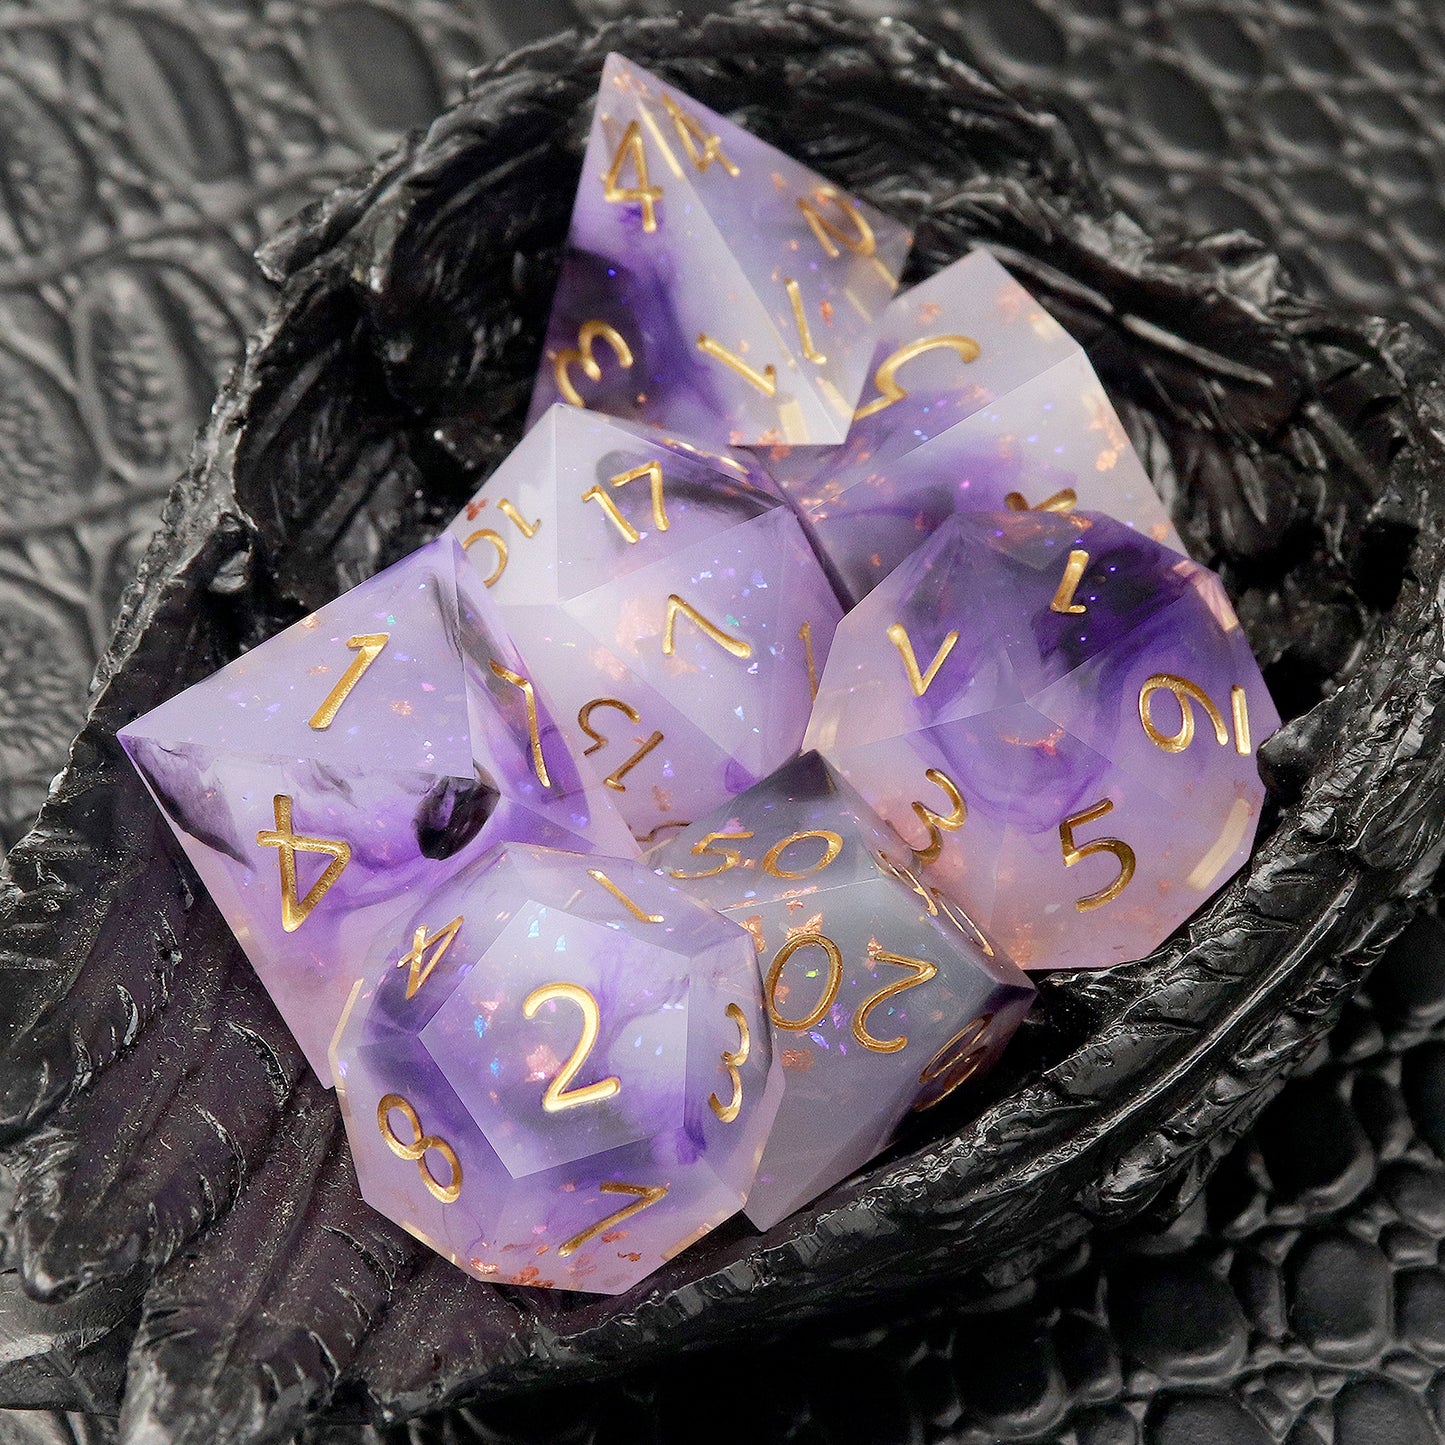 Haxtec Sharp Edge Dice Set DND Dice D&D Dice for Dungeons and Dragons Gift- Nebula